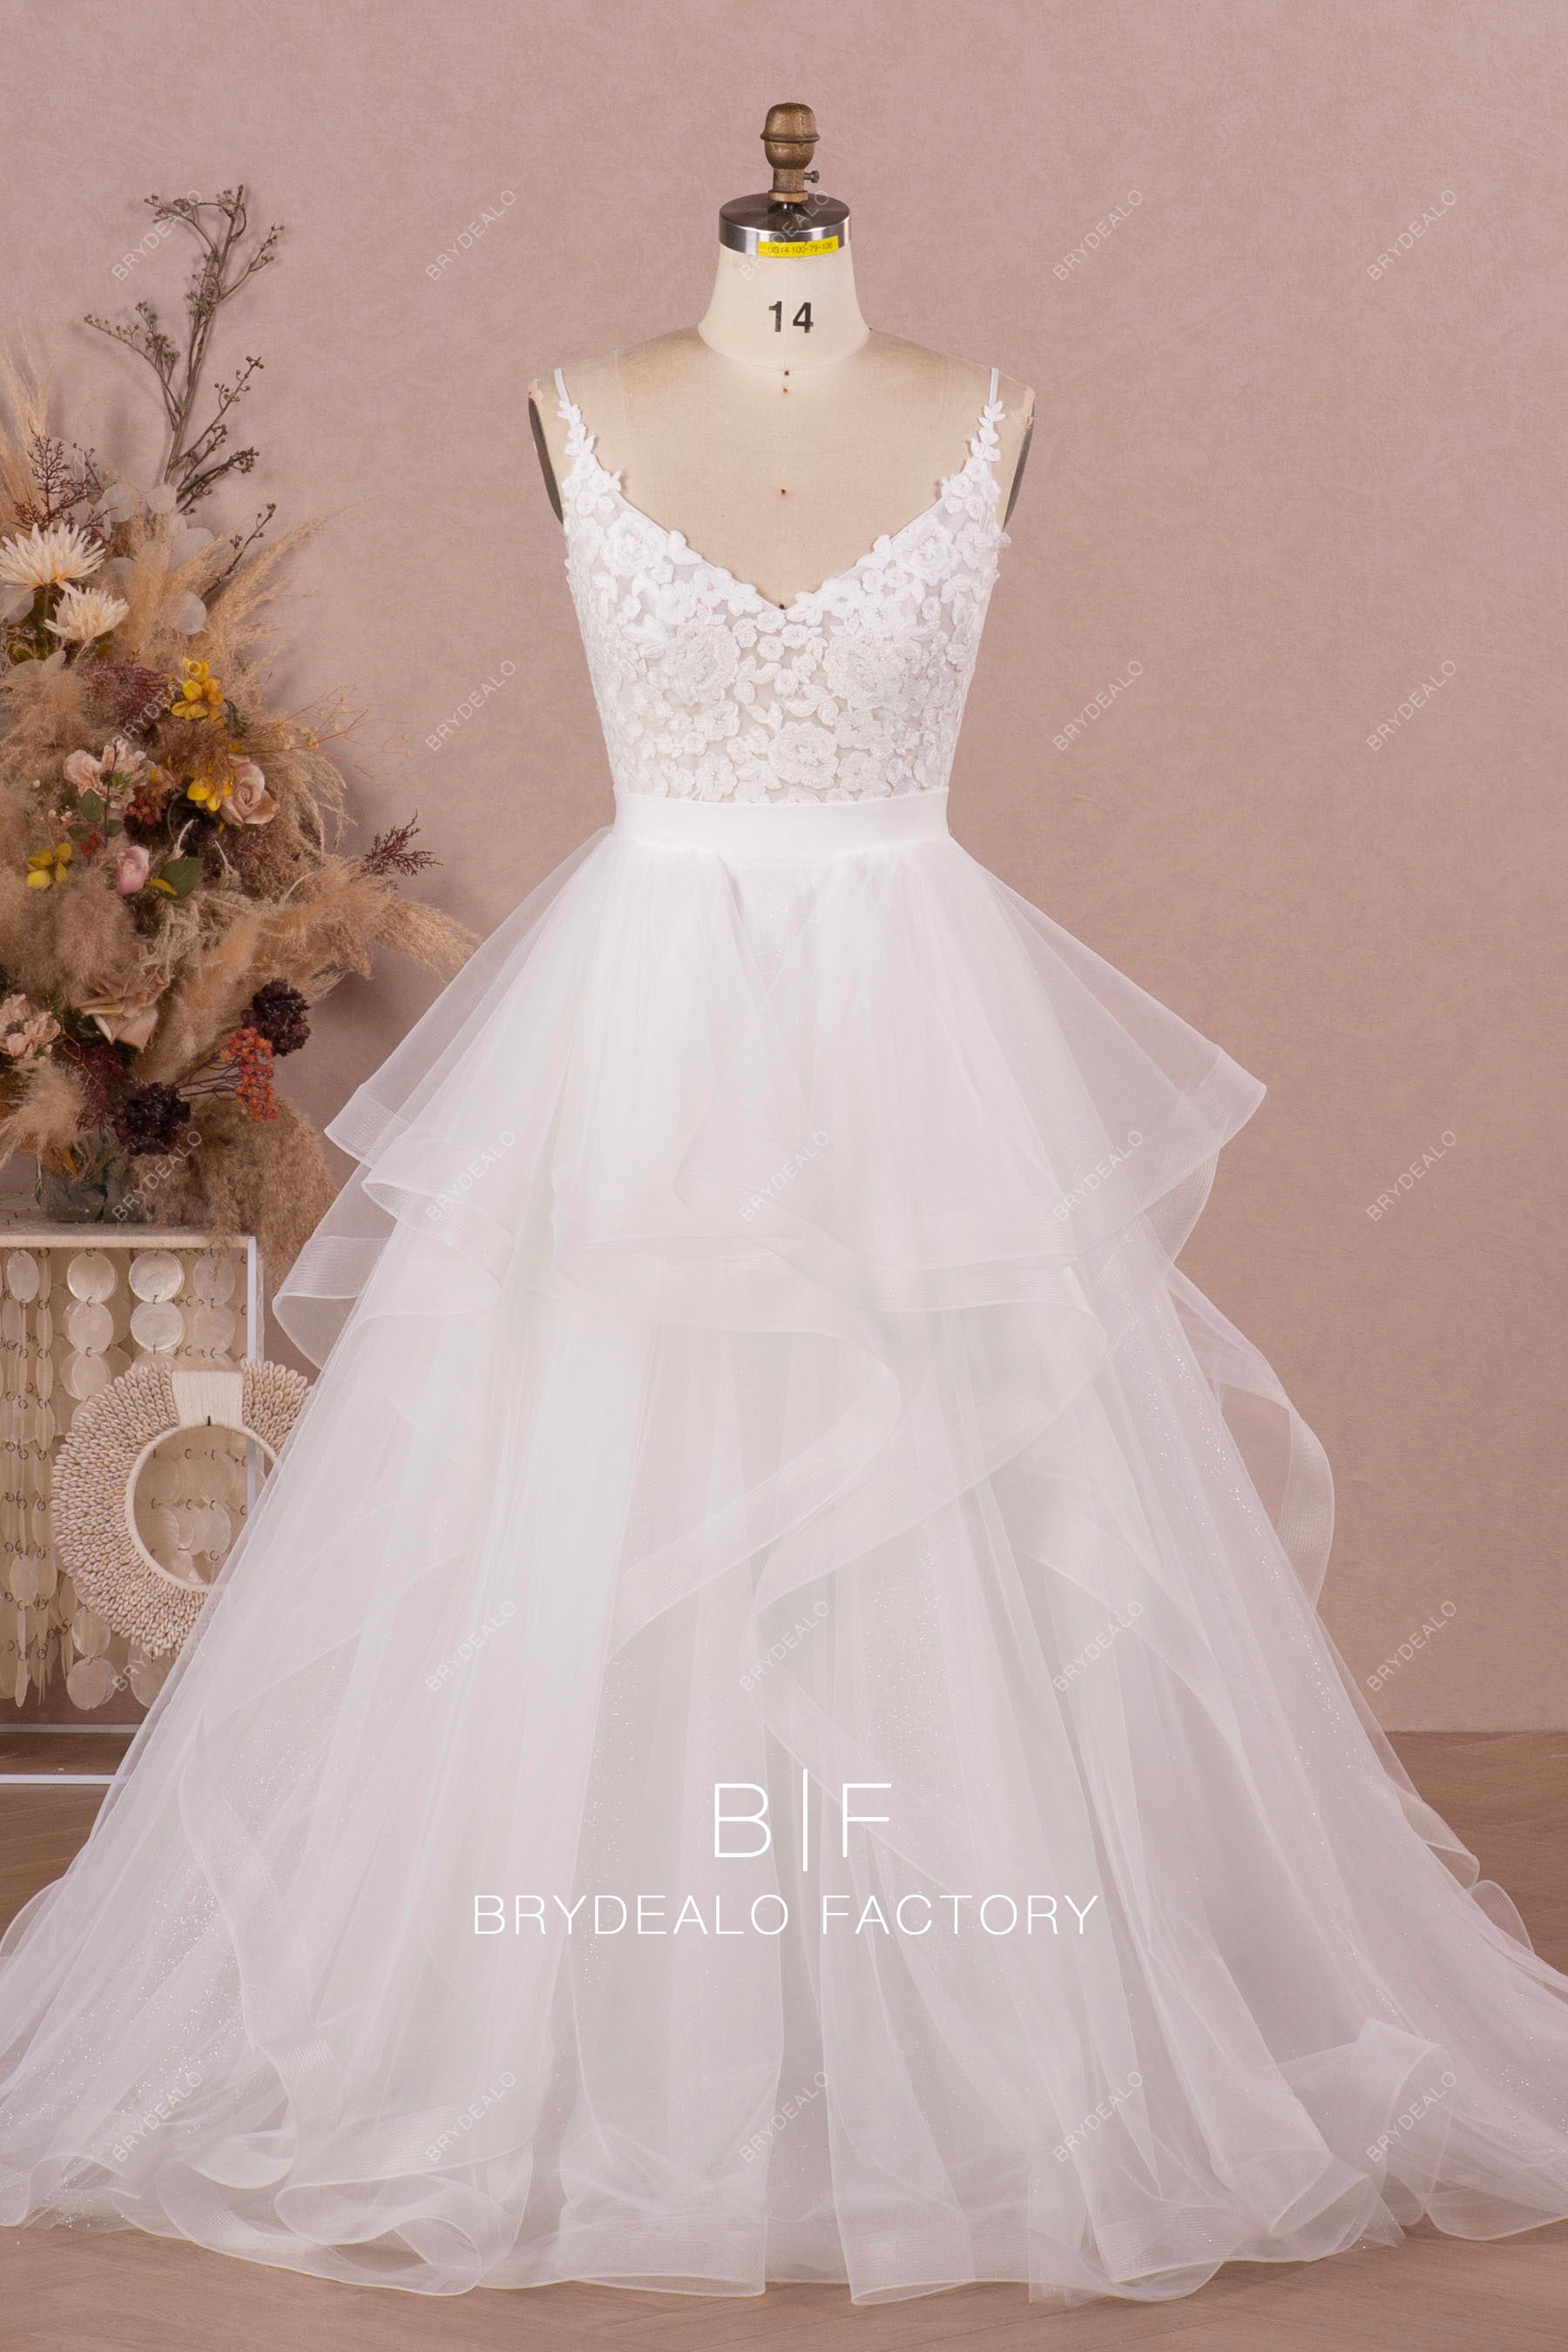 V-neck lace top ruffled tulle skirt bridal gown